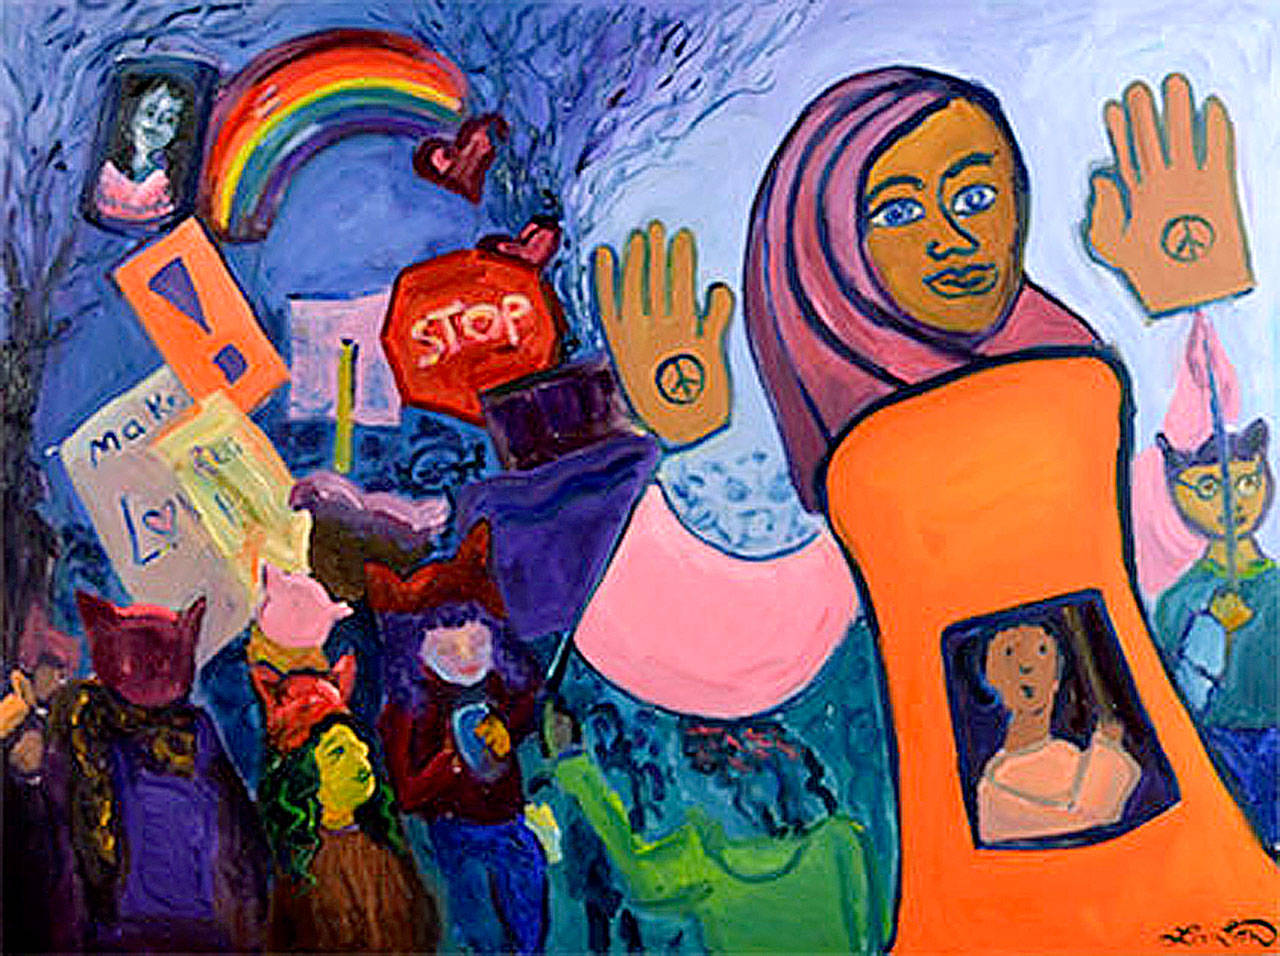 “Women’s March,” oil on canvas by Andrea K. Lawson (Image courtesy of The Island Gallery)